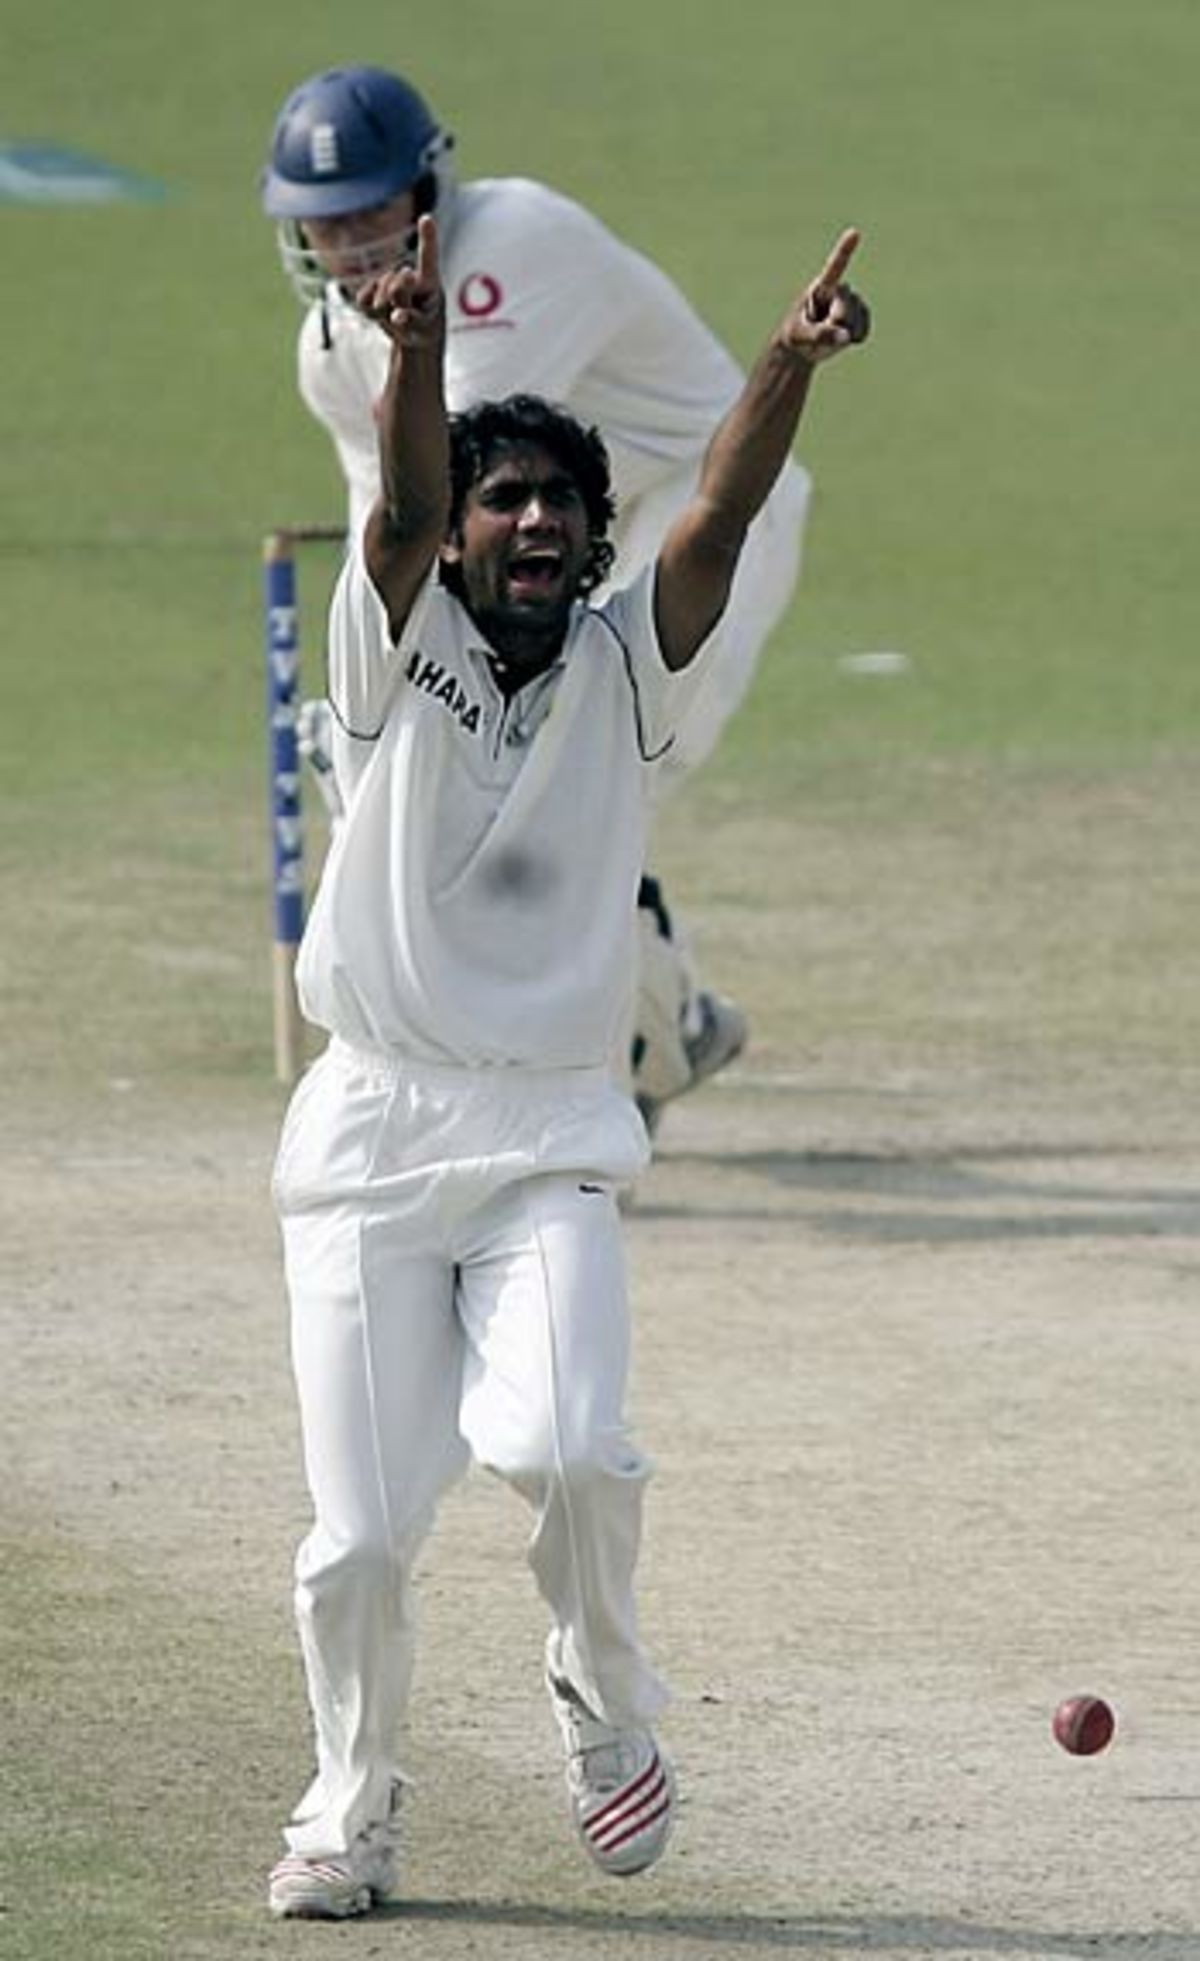 Munaf Patel appealing for LBW against Liam Plunkett during a 2nd test at Mohali (Punjab)